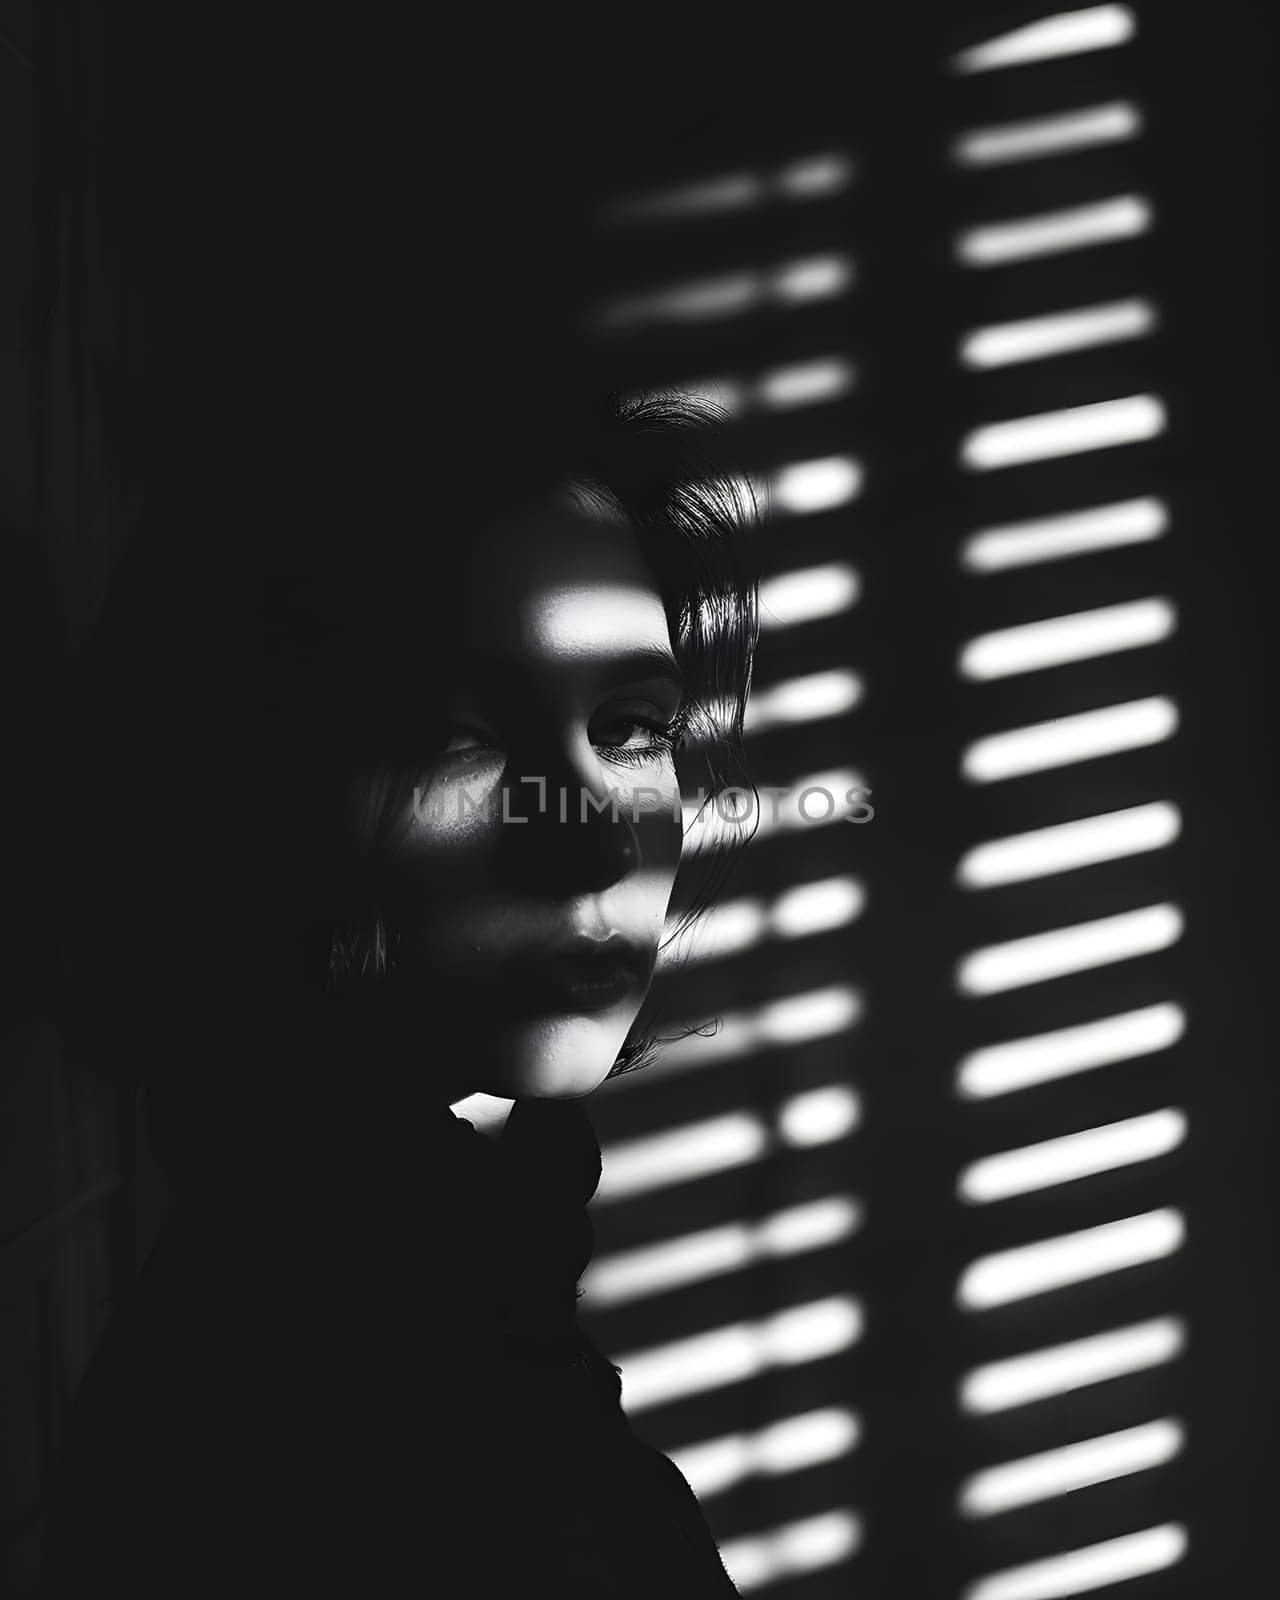 A womans face is captured in a black and white photo behind blinds, creating a pattern of tints and shades with a sense of symmetry and darkness